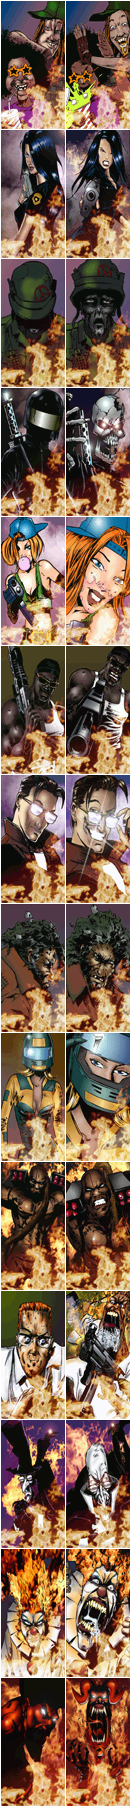 Twisted Metal 2 - Character Portraits